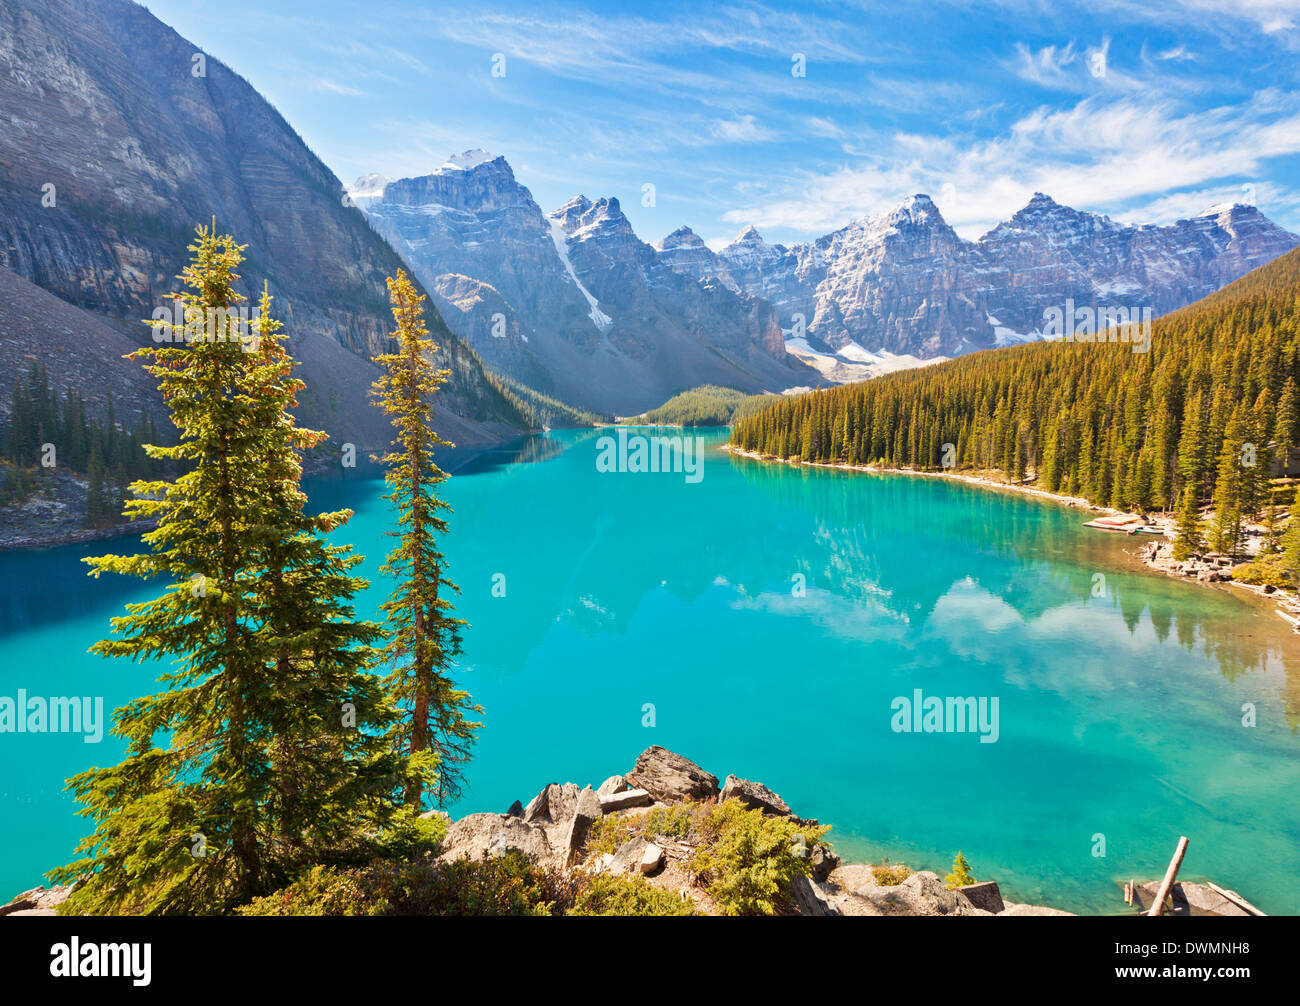 Moraine Lake in the Valley of the Ten Peaks, Banff National Park, UNESCO World Heritage Site, Alberta, Canadian Rockies, Canada Stock Photo